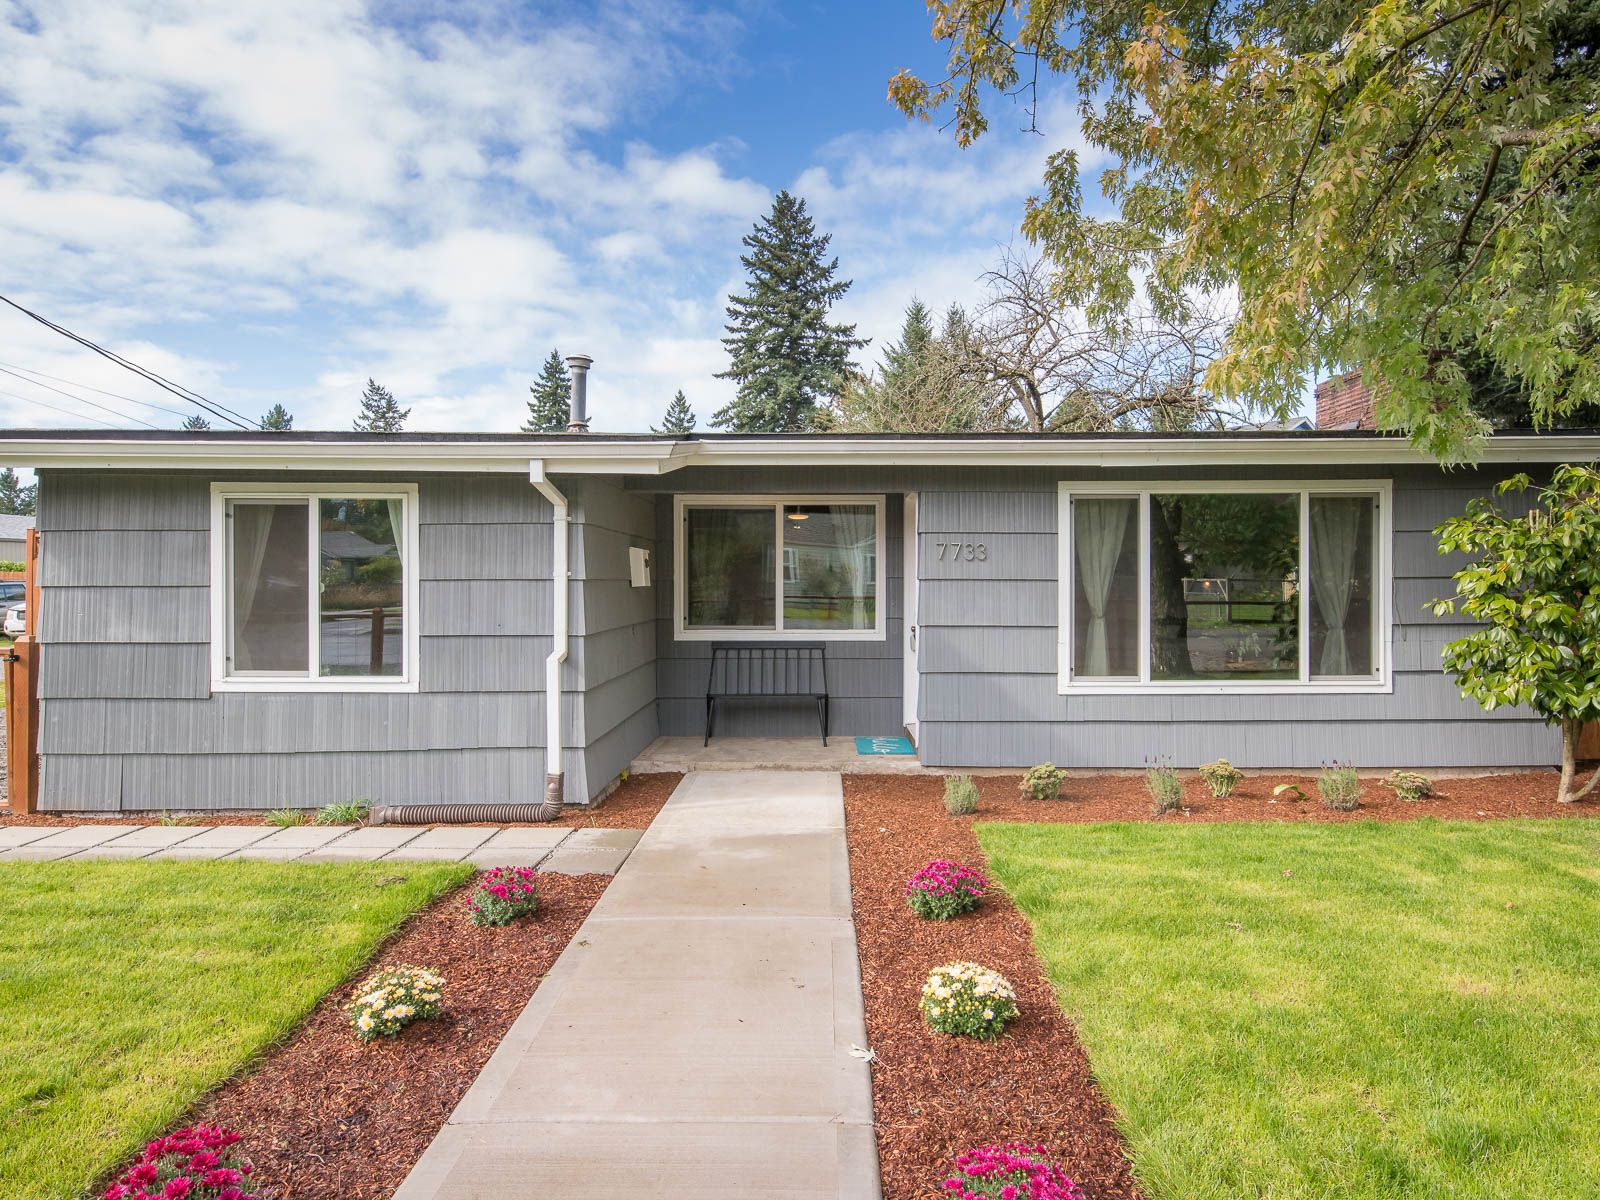 Picture Perfect 60’s Ranch – Just Listed!